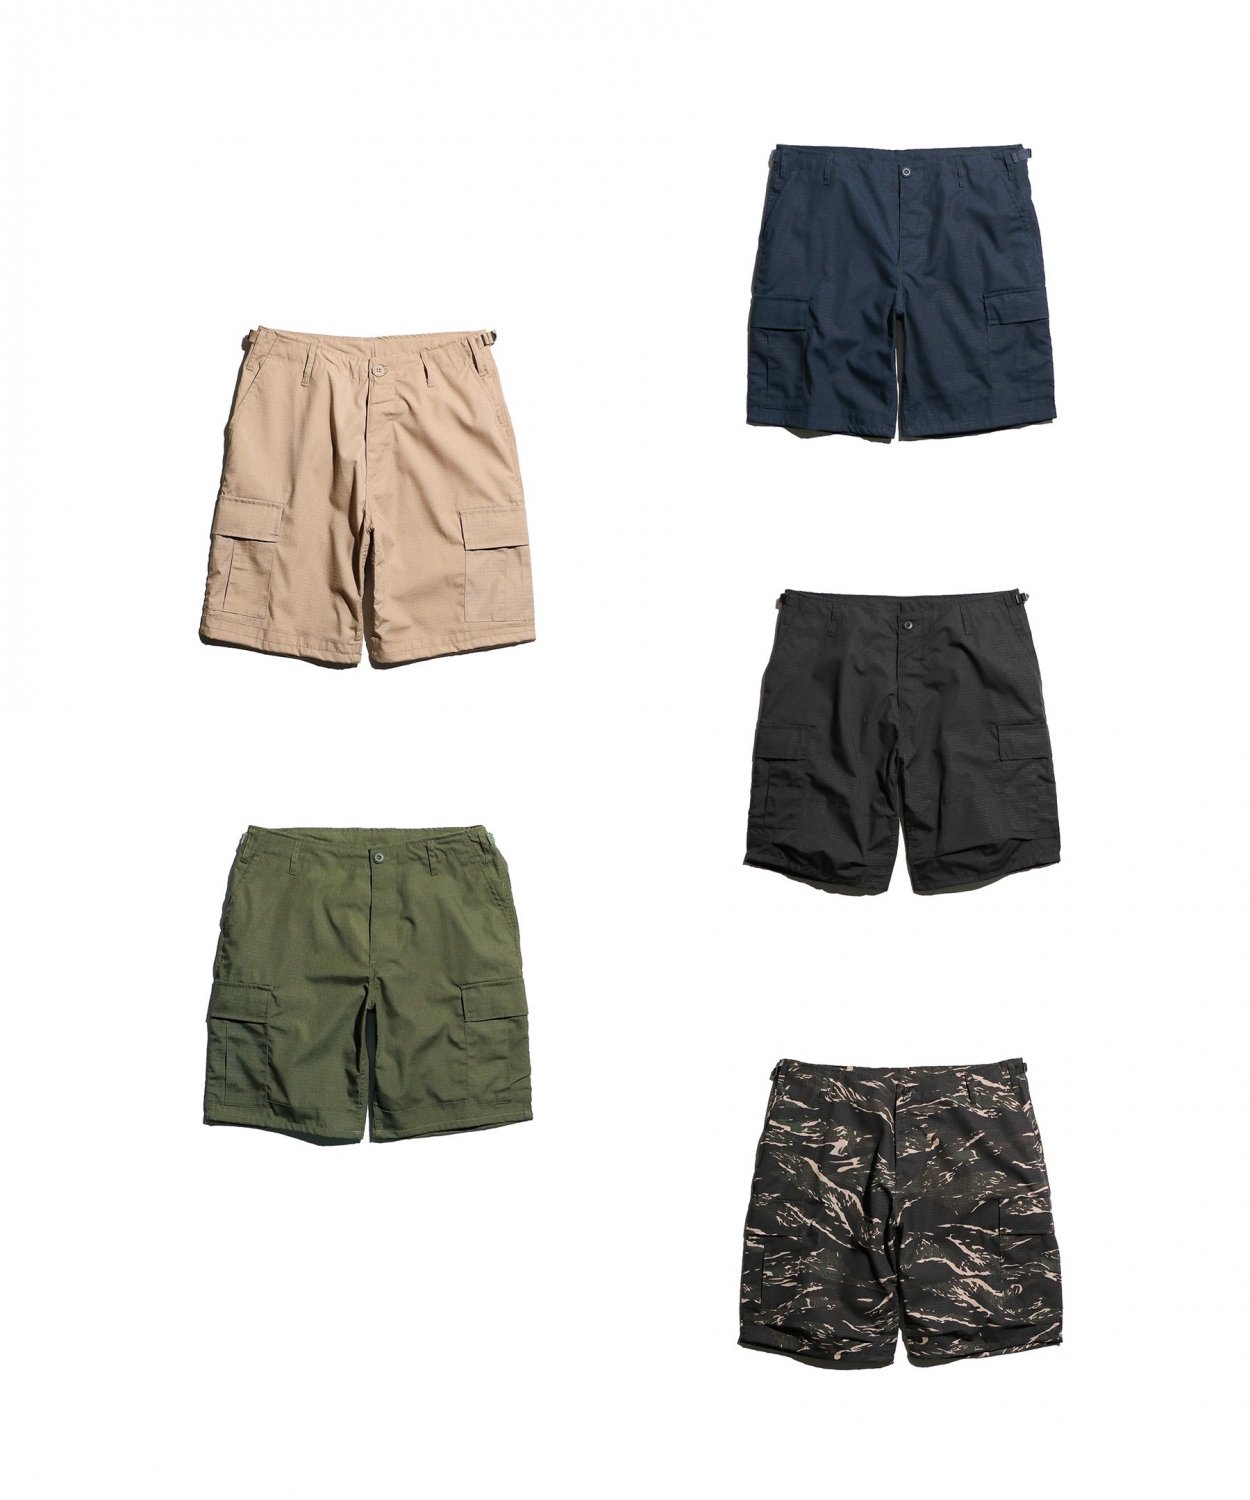 MADE IN STANDARD / US ARMY BDU SHORTS